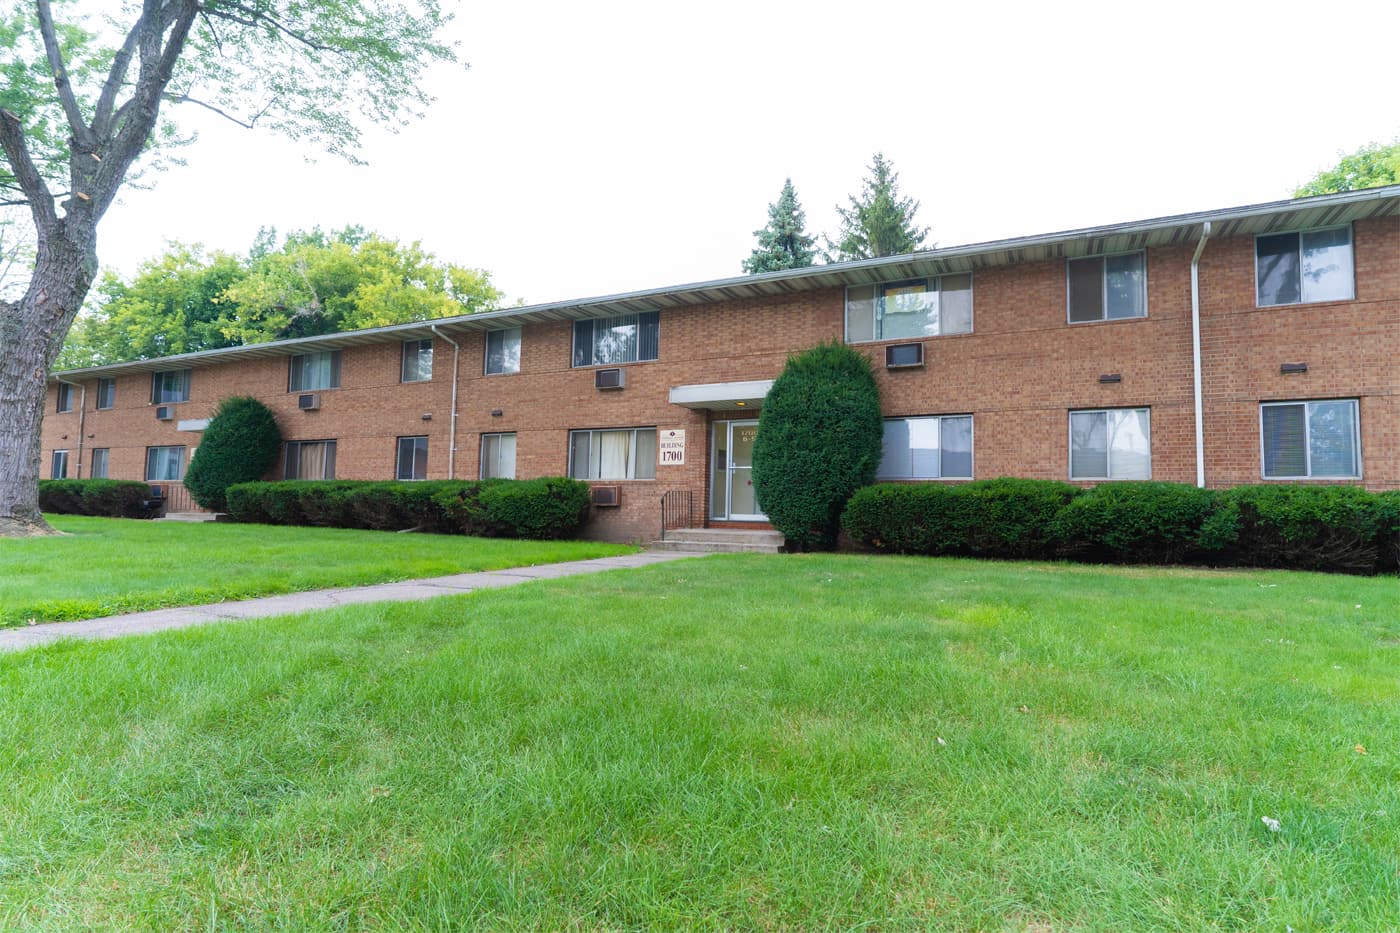 Additional Information Imperial Manor Apartments Greece NY